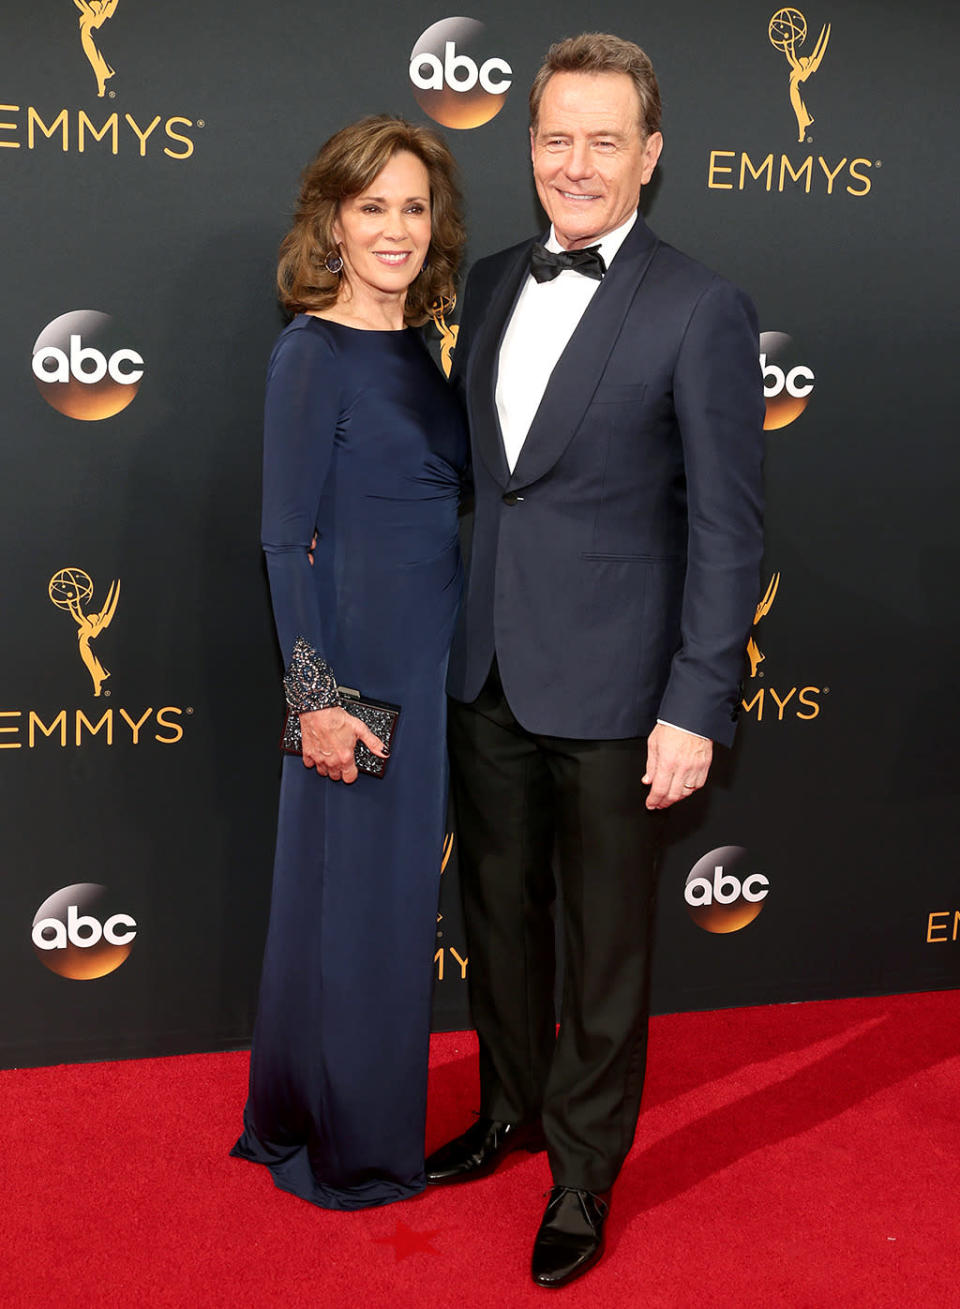 <p>Bryan Cranston and Robin Dearden arrive at the 68th Emmy Awards at the Microsoft Theater on September 18, 2016 in Los Angeles, Calif. (Photo by Getty Images) </p>